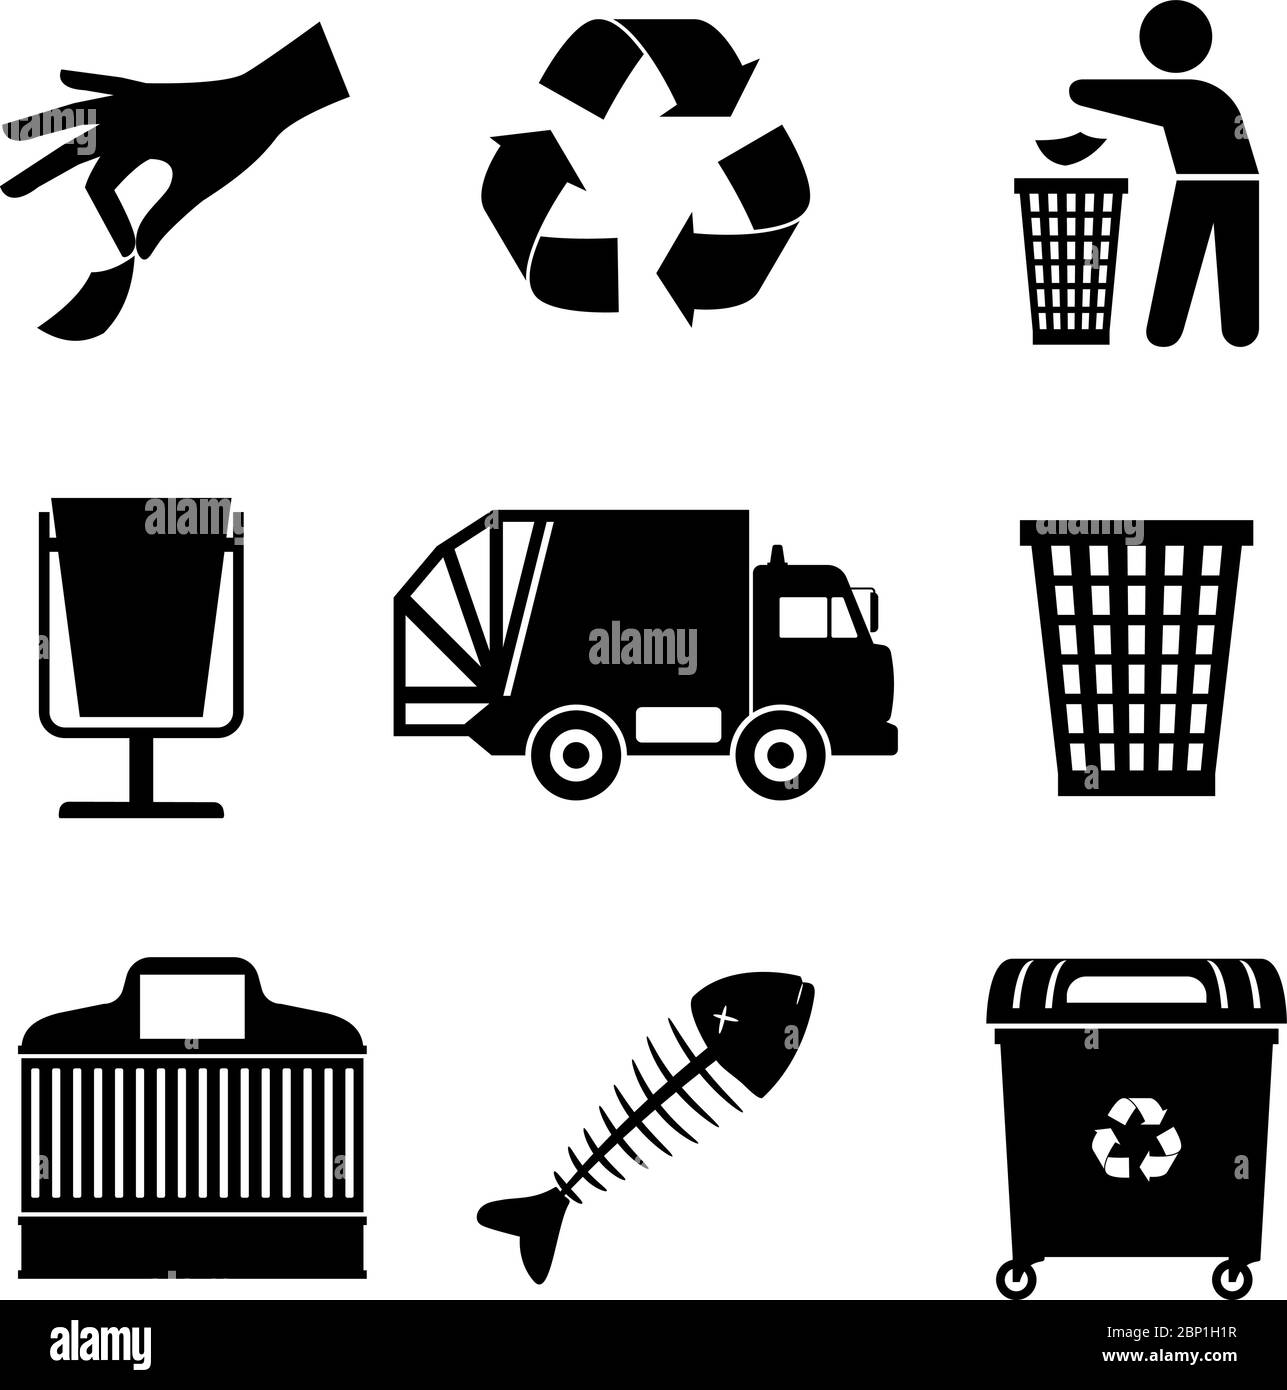 Black garbage track and trash bins, recycle sign icons, vector illustration Stock Vector